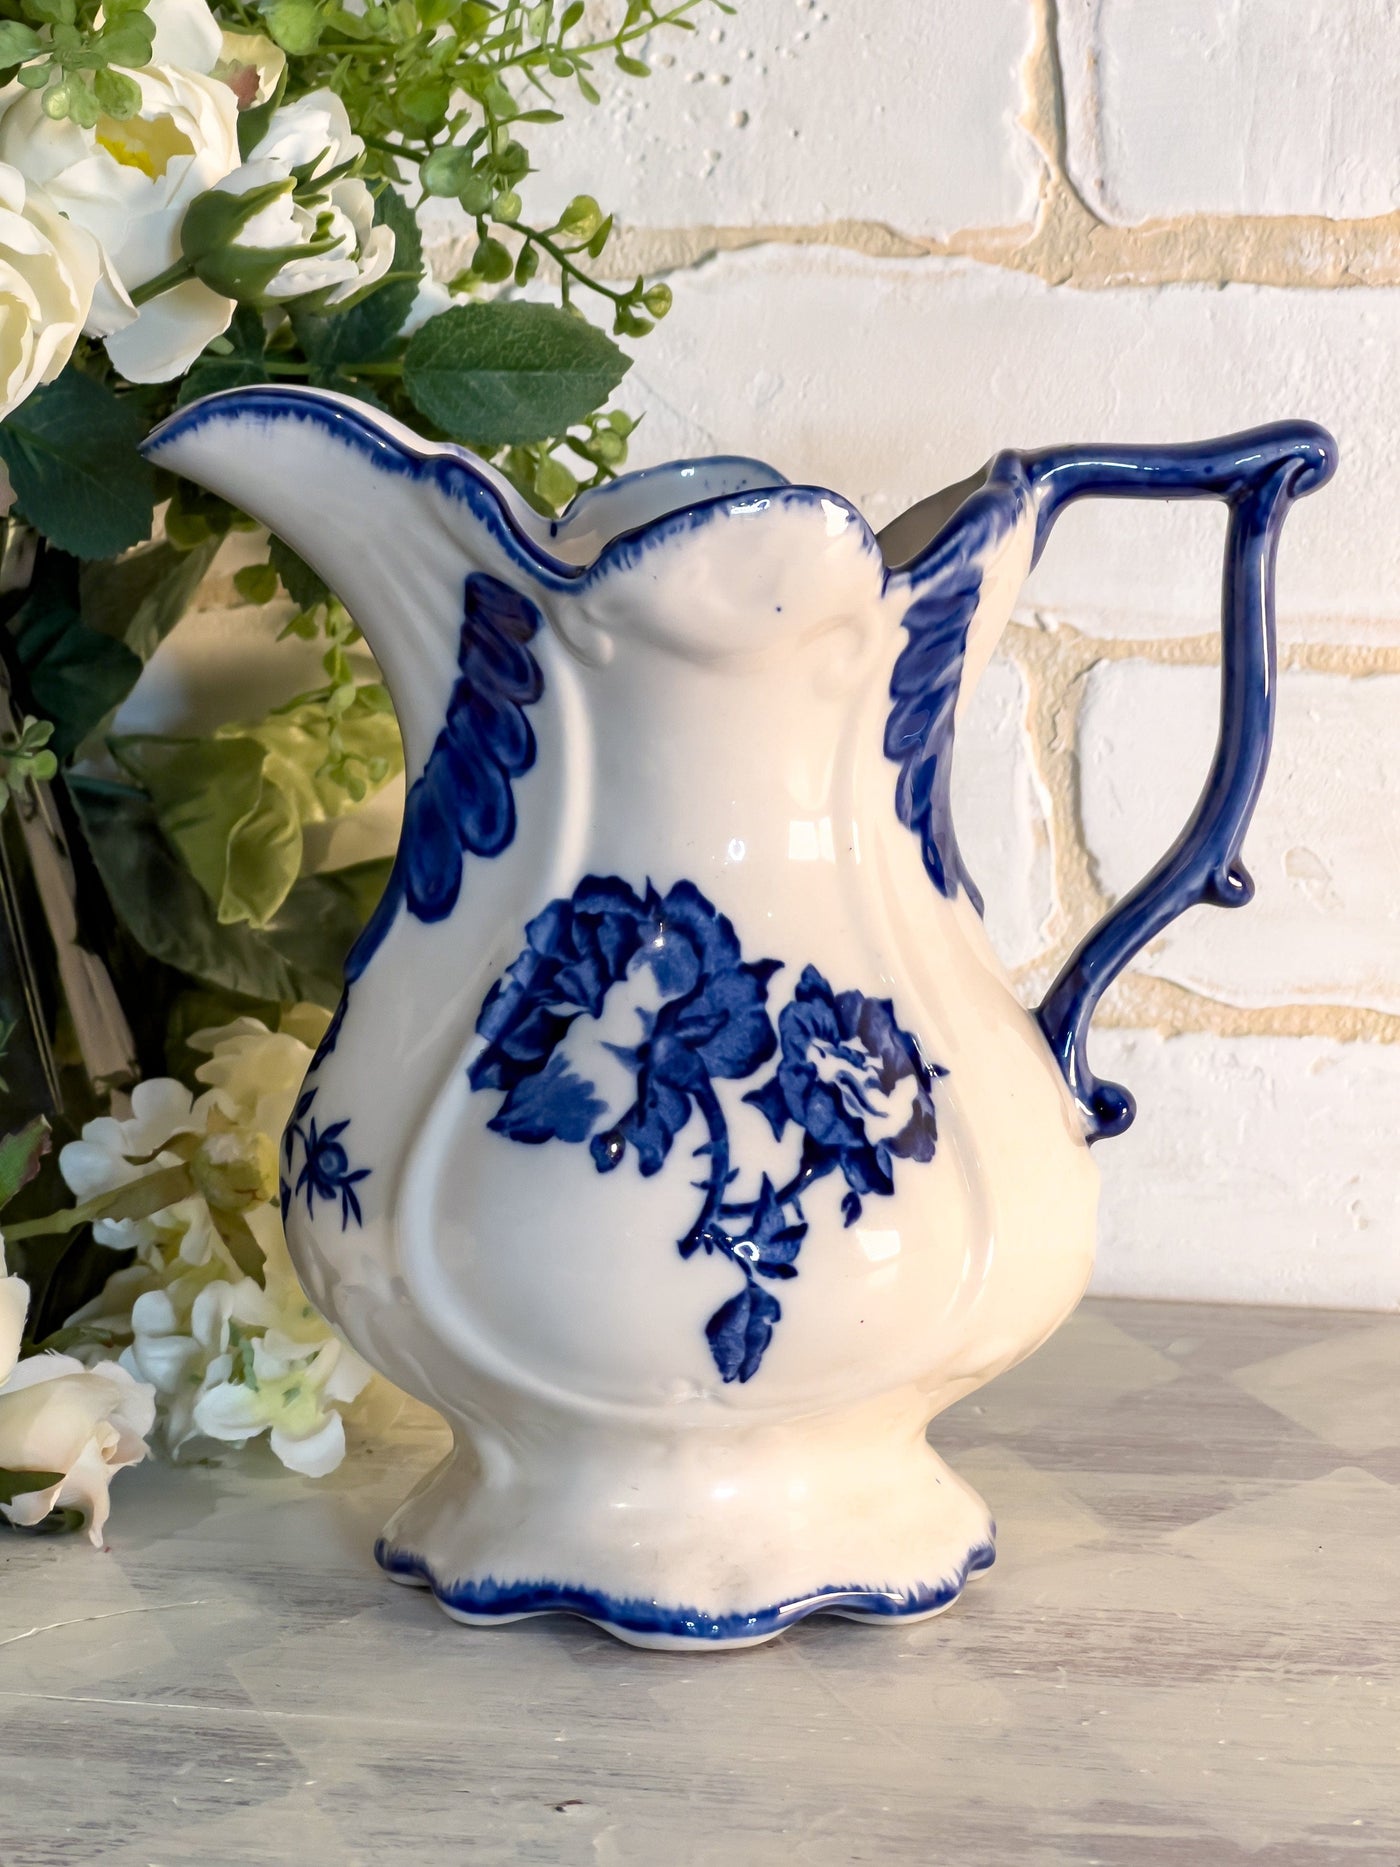 BLUE & WHITE VINTAGE IRONSTONE PITCHER / VASE Revive In Style Vintage Furniture Painted Refinished Redesign Beautiful One of a Kind Artistic Antique Unique Home Decor Interior Design French Country Shabby Chic Cottage Farmhouse Grandmillenial Coastal Chalk Paint Metallic Glam Eclectic Quality Dovetailed Rustic Furniture Painter Pinterest Bedroom Living Room Entryway Kitchen Home Trends House Styles Decorating ideas